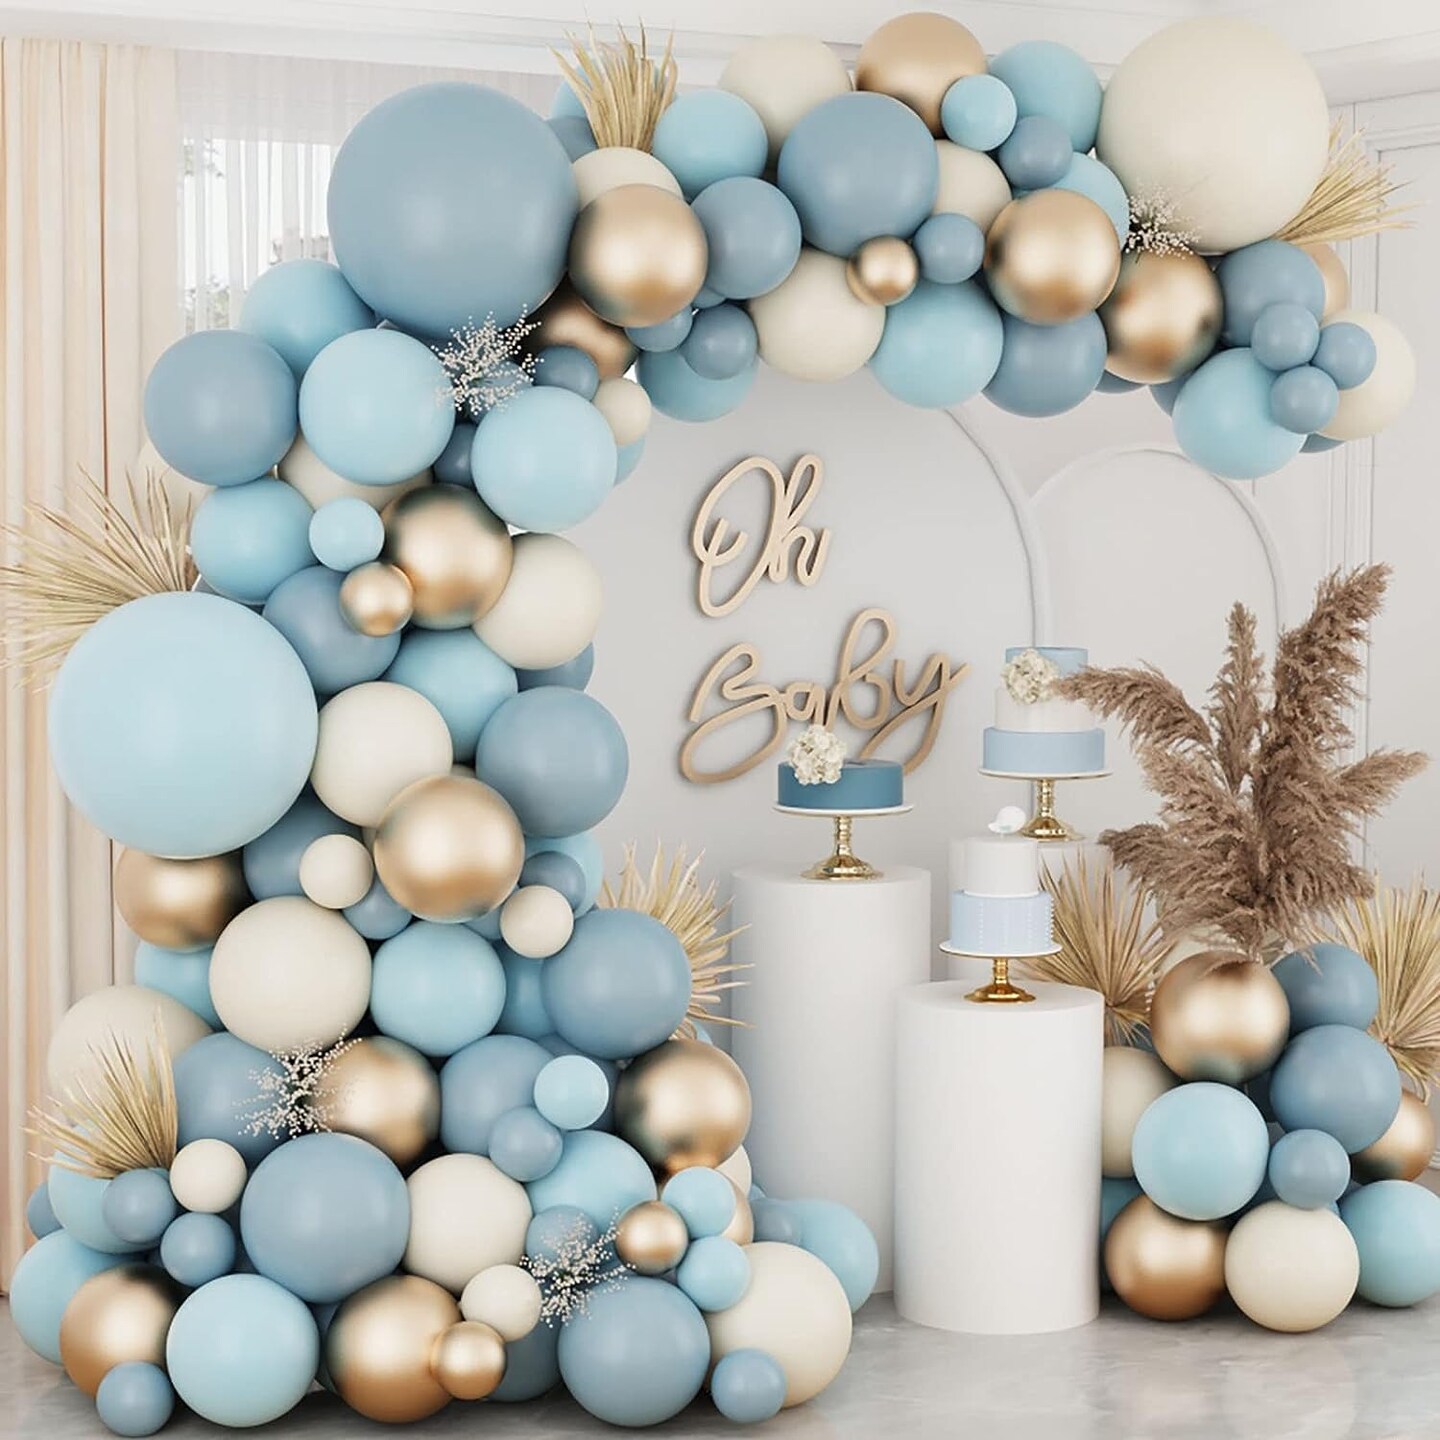 Dusty Baby Blue Balloons Balloon Arch Garland Kit,Sand White Metallic Gold Dusty Slate Fog Baby Blue Balloons for Boy Baby Shower Bridal Shower Birthday Party Decorations for Boy Men